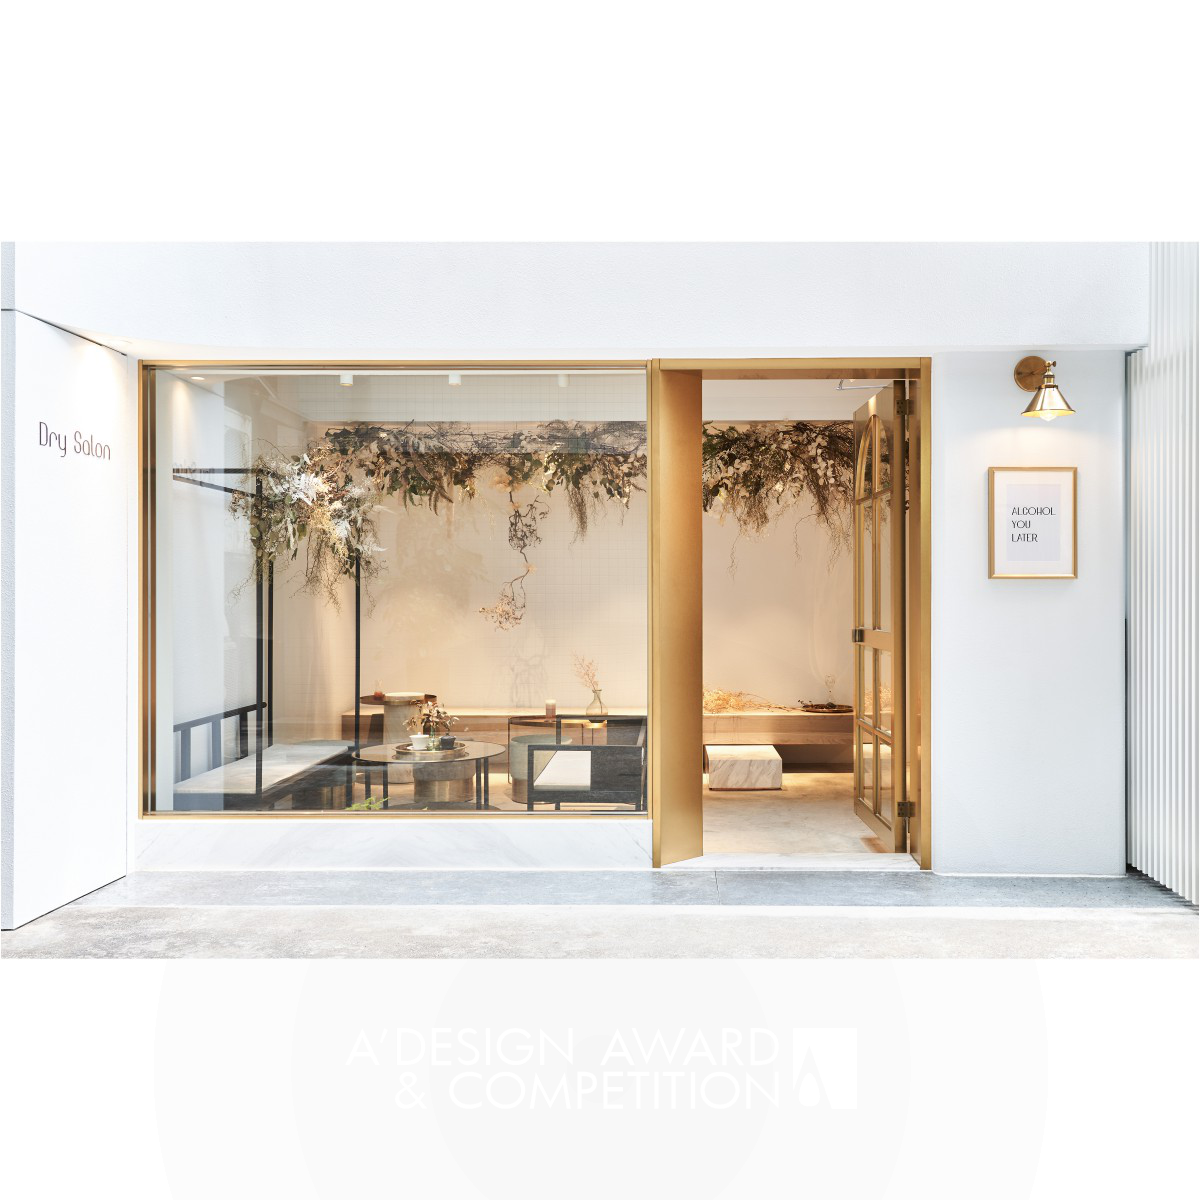 Dry Salon Commercial Space by Tim Chen Golden Interior Space and Exhibition Design Award Winner 2020 